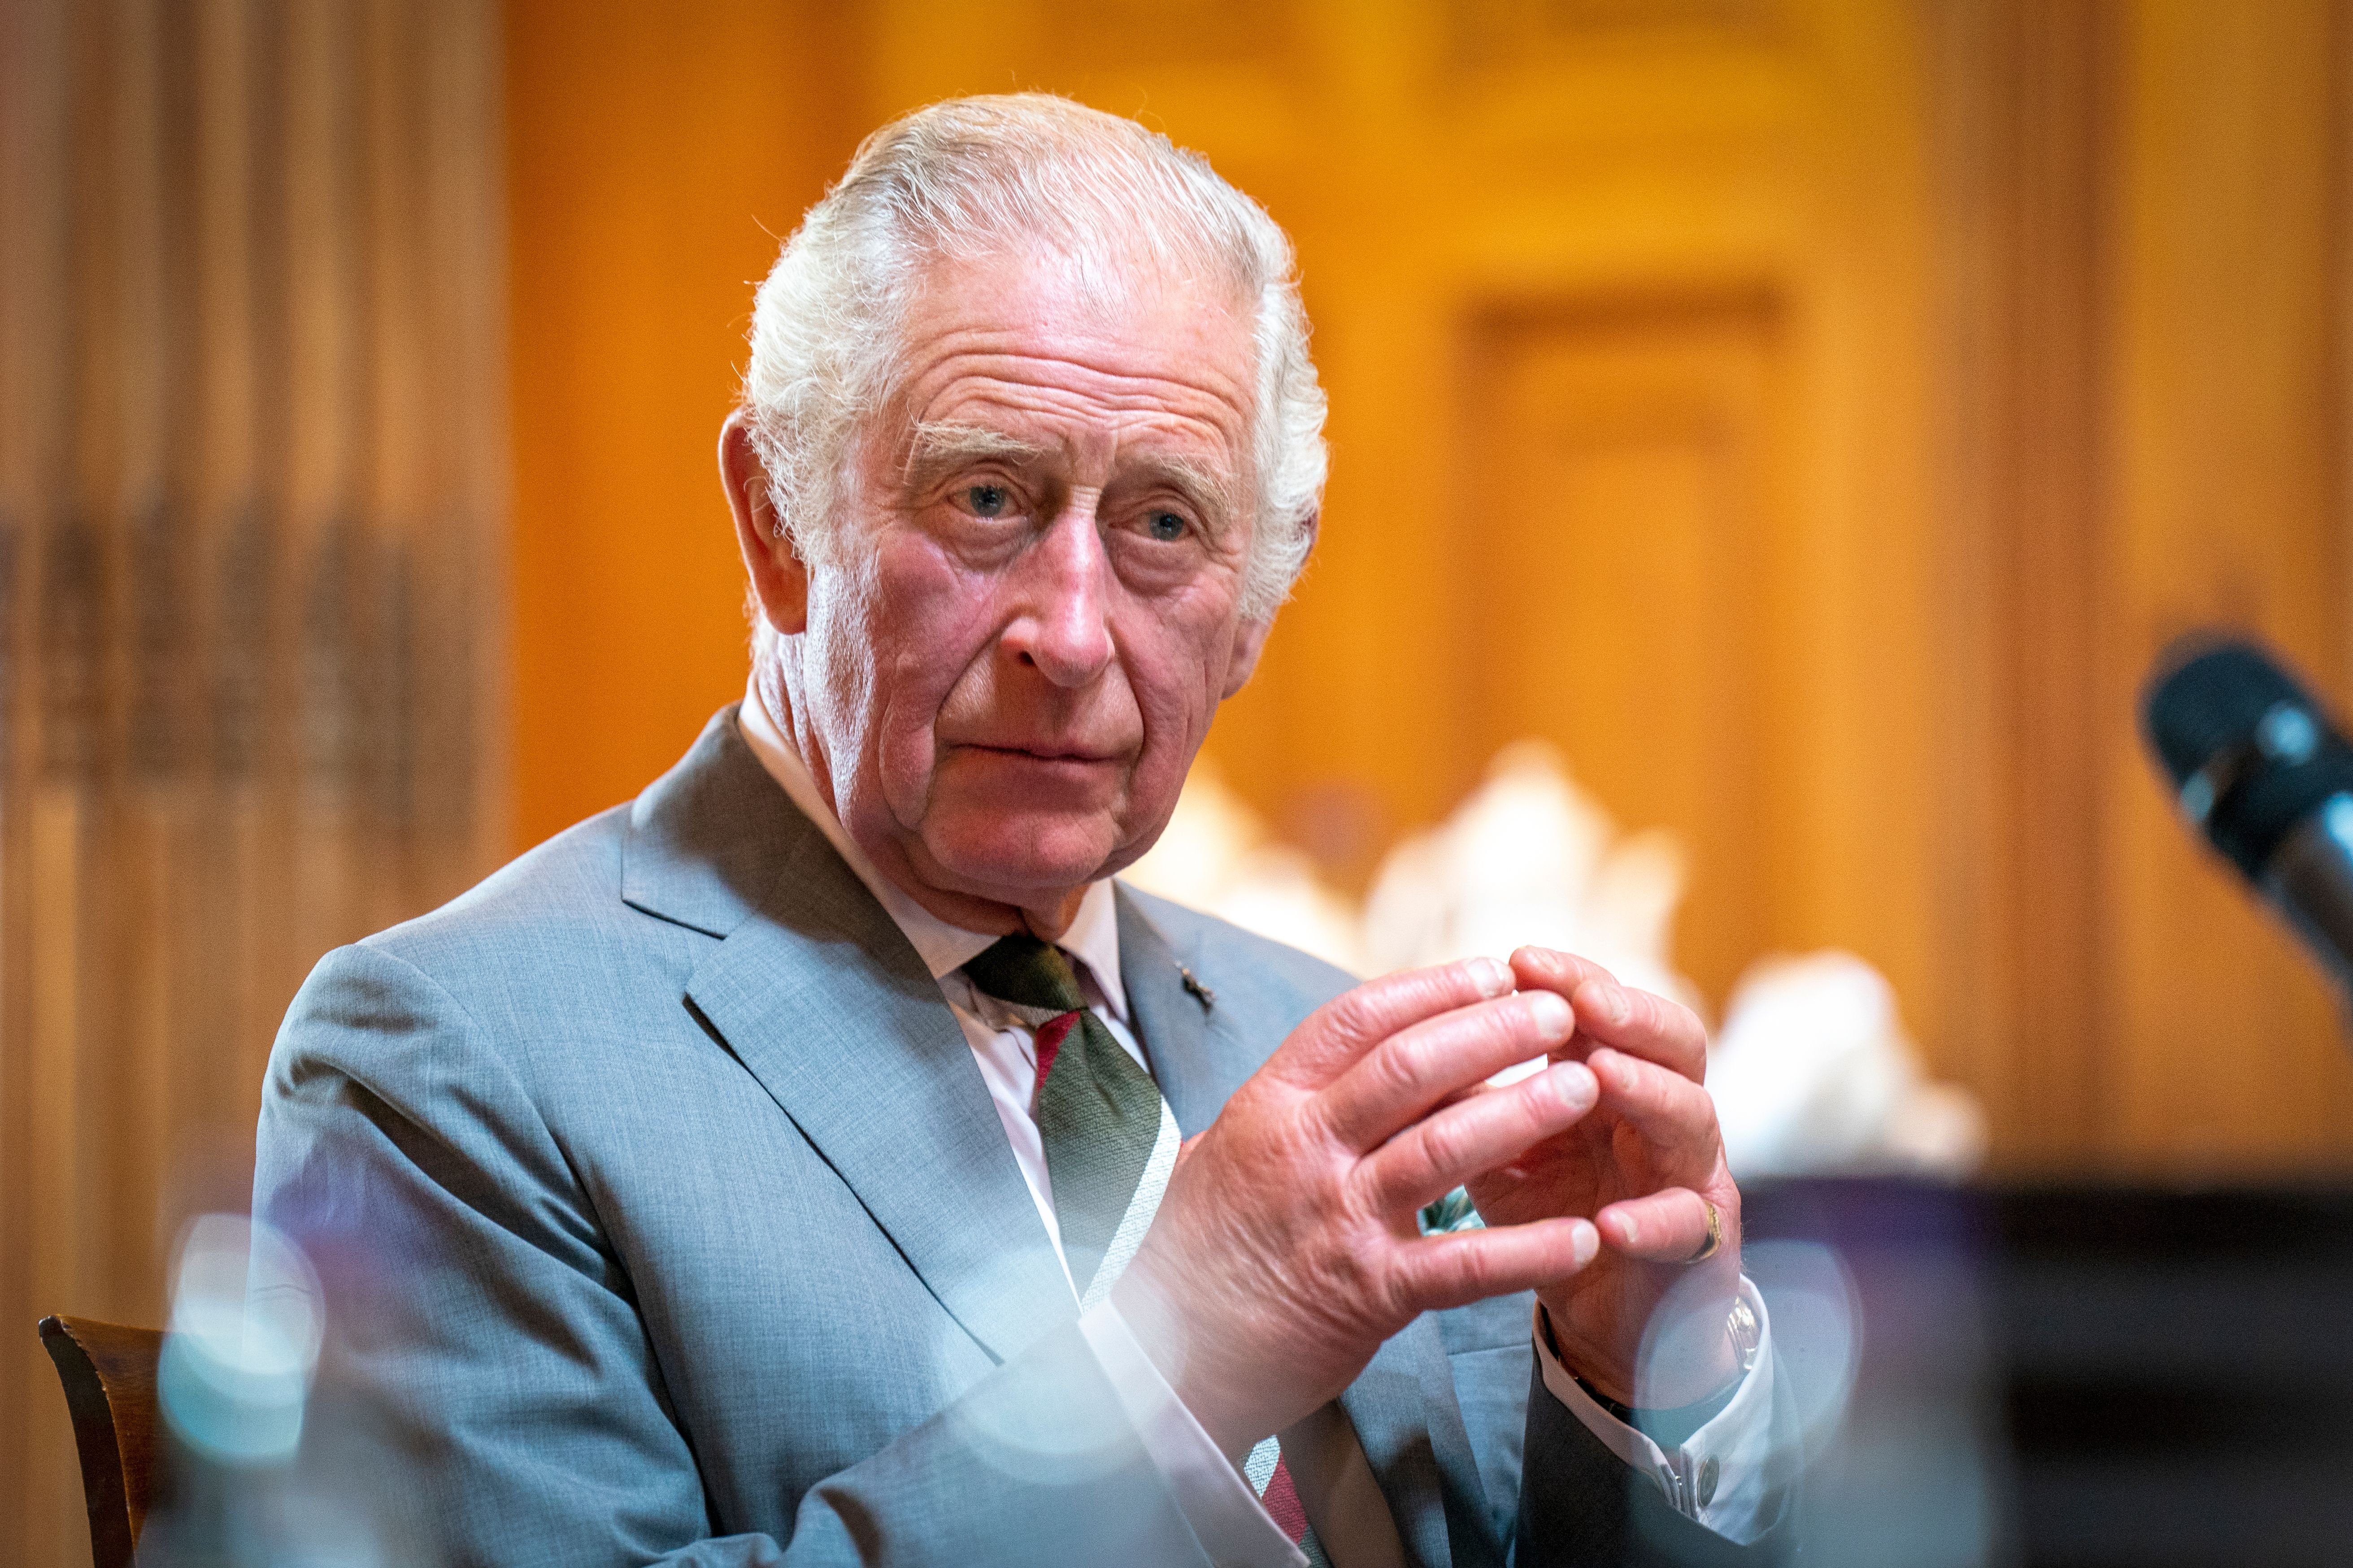 King Charles III during a roundtable discuss allergies and the environment, at Dumfries House, Cumnock on September 7, 2022 in Lanark, Scotland. | Source: Getty Images